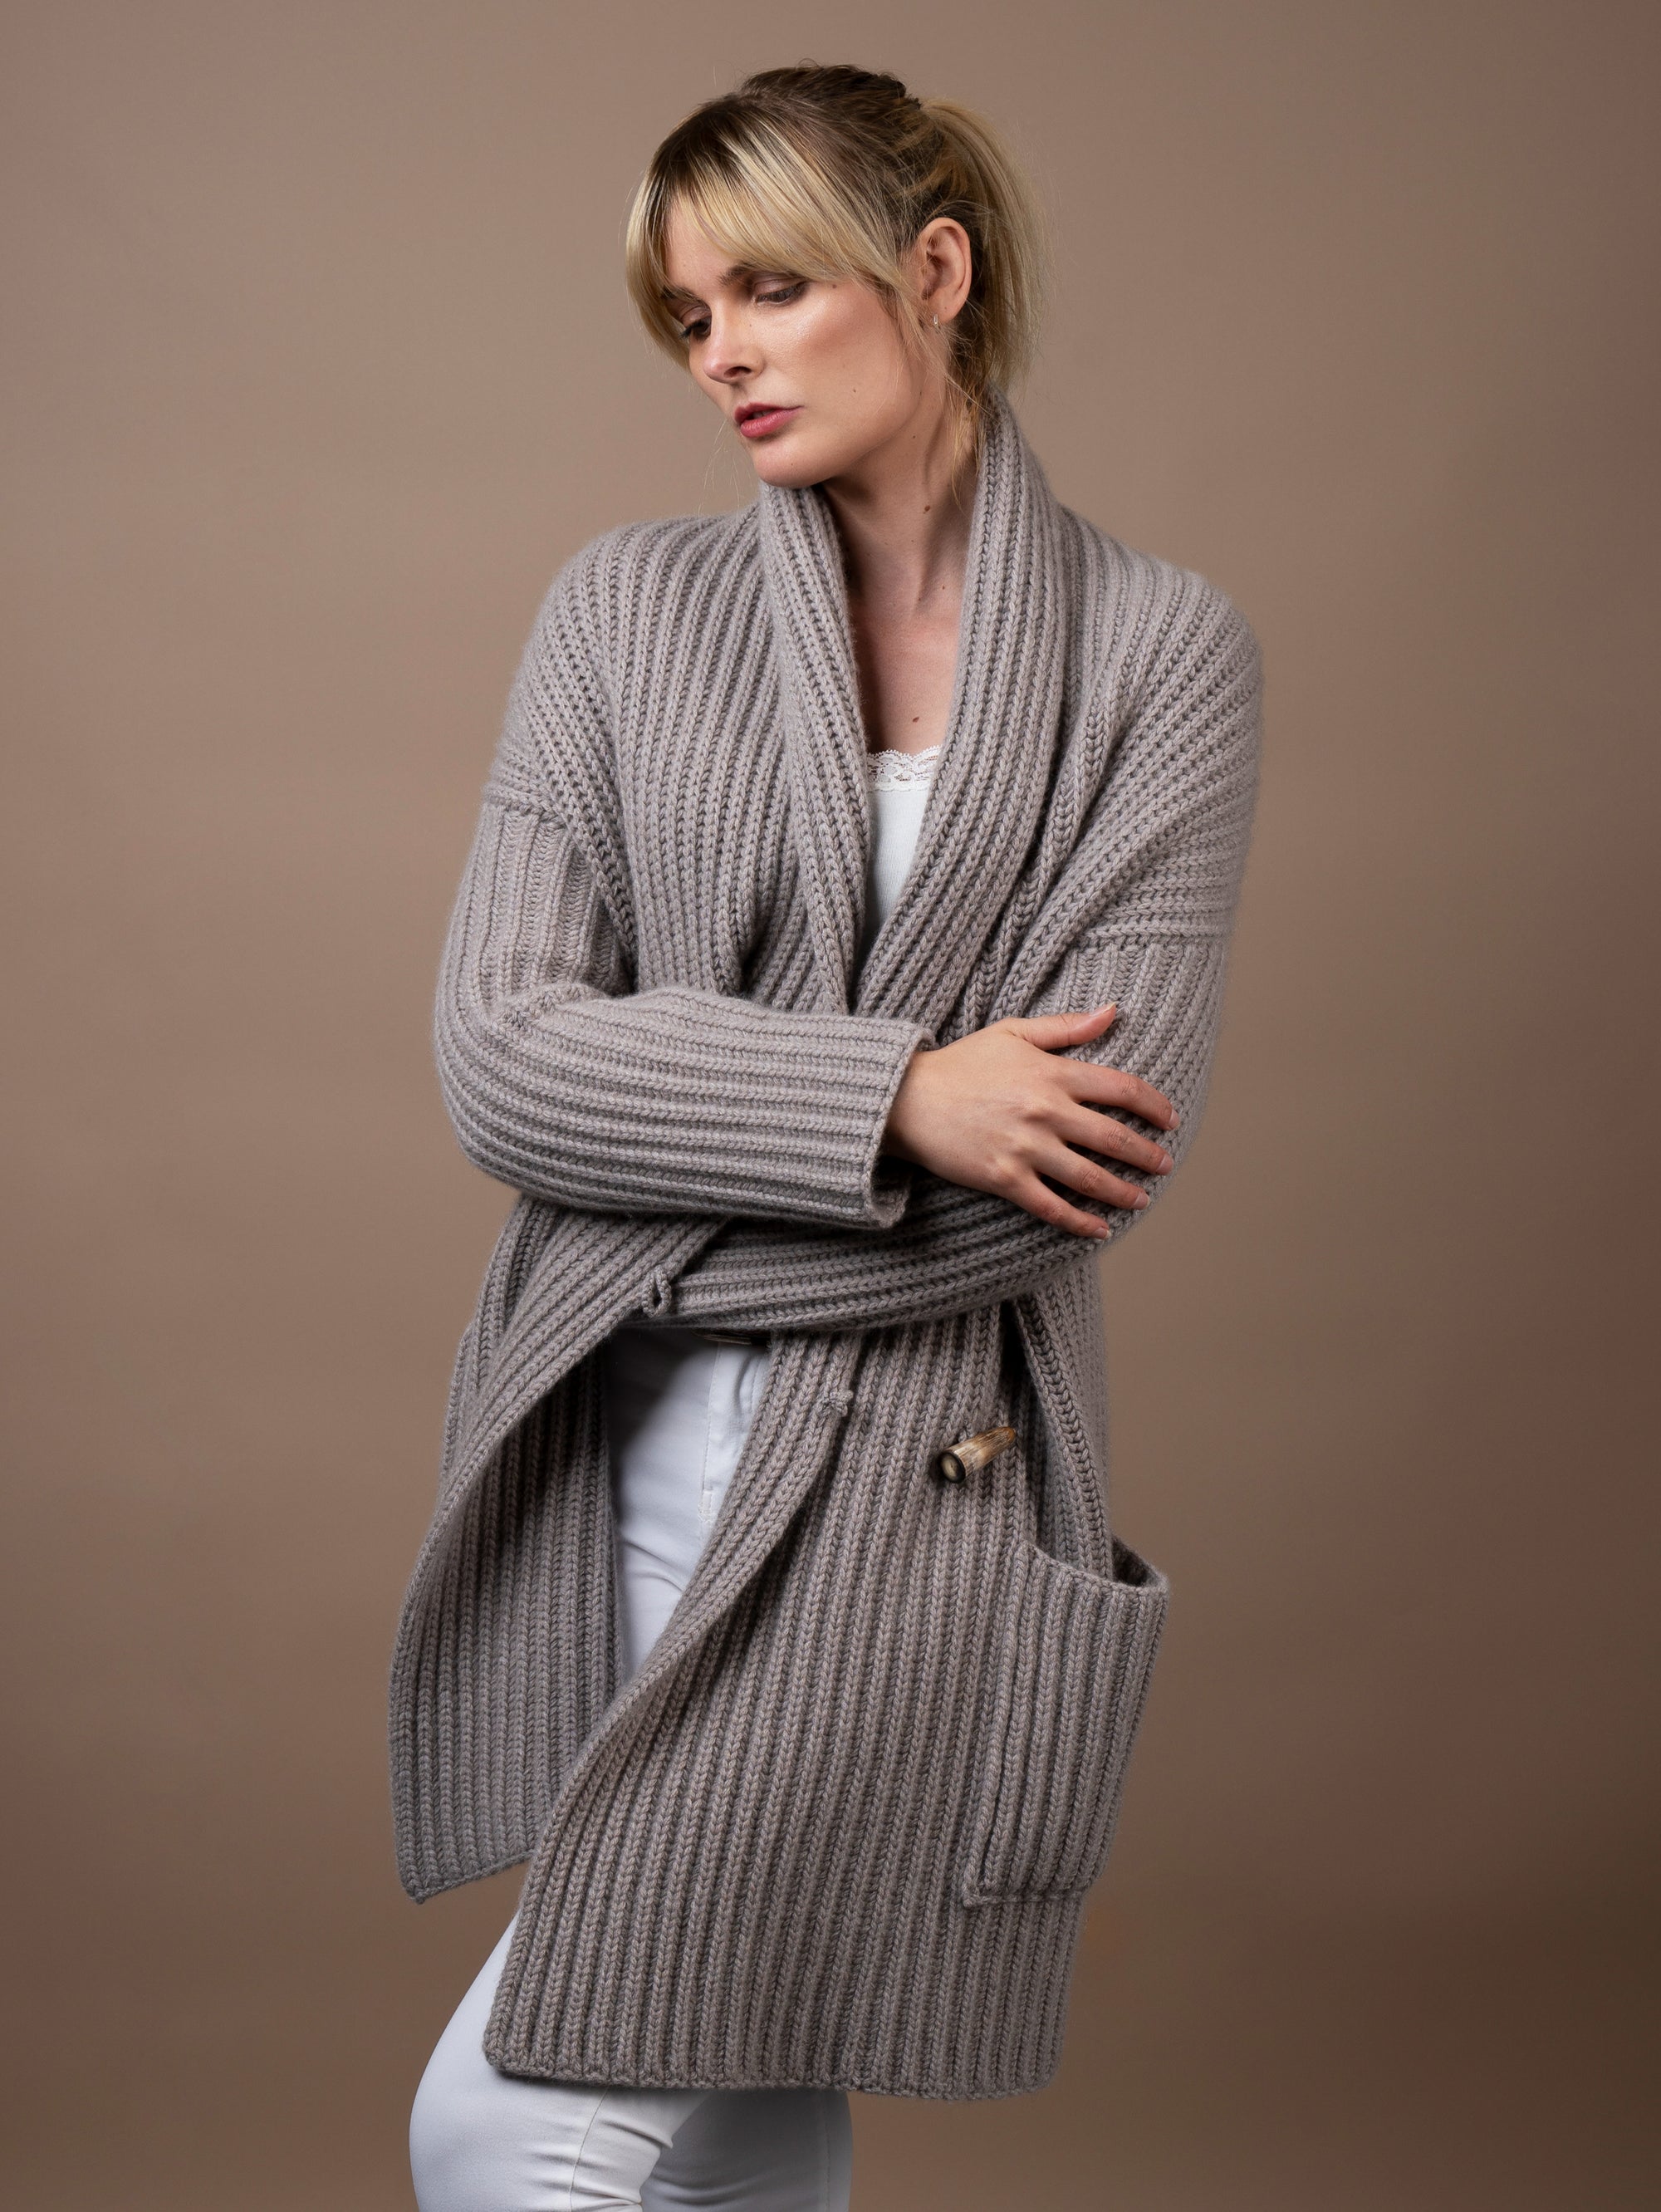 Ladies Cashmere Shawl Cardigan Wrap Jumper in mushroom. 100% cashmere handmade under the Royal Warrant in the UK. This is Cashmere at it's finest. 